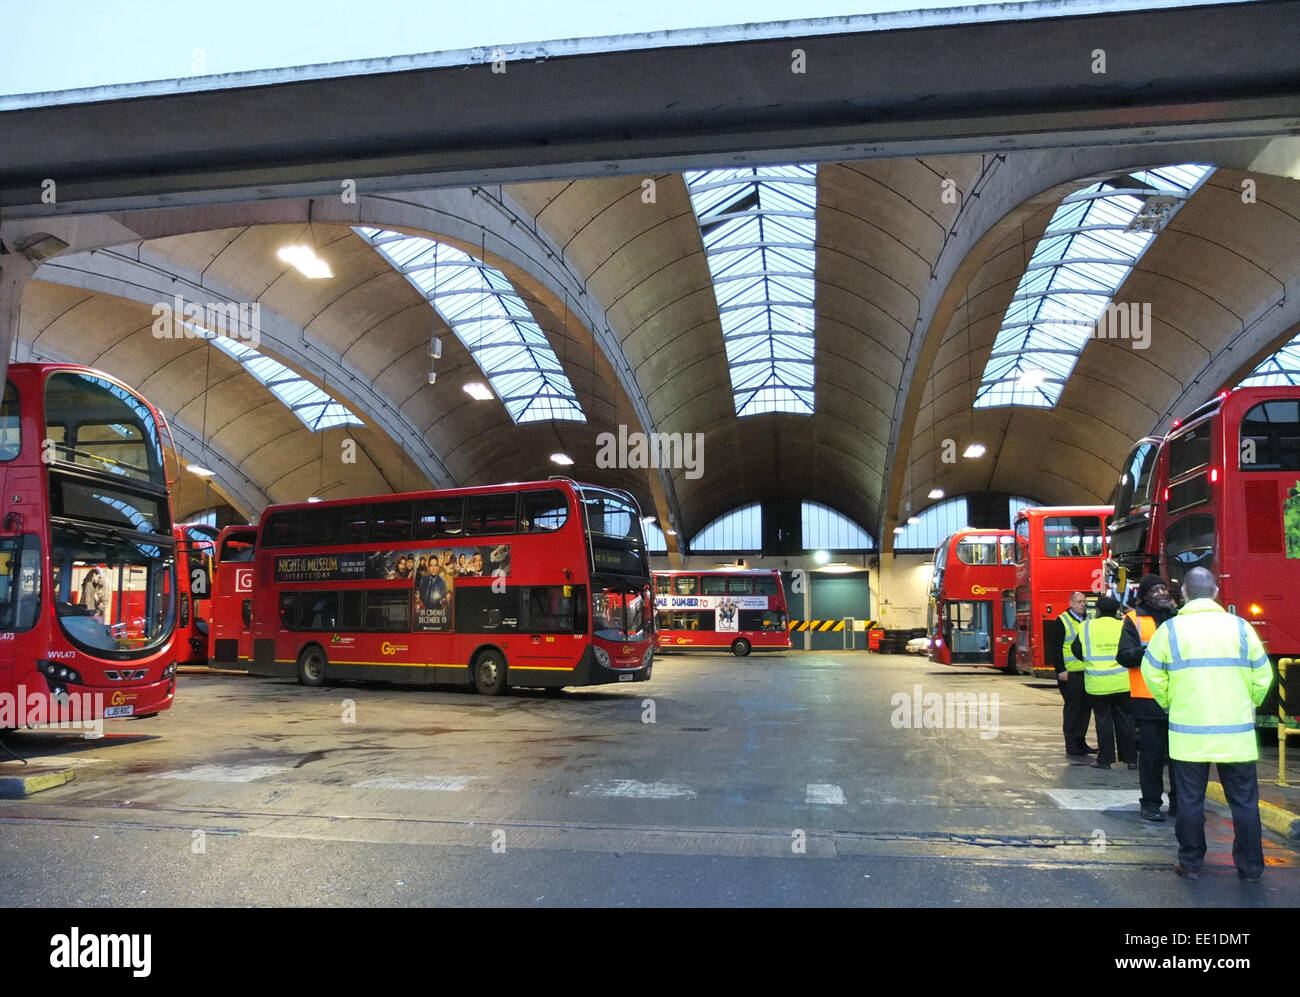 London, UK. 13th January, 2015. Bus drivers and other union members set up a picket line outside Stockwell bus station Credit:  nelson pereira/Alamy Live News Stock Photo